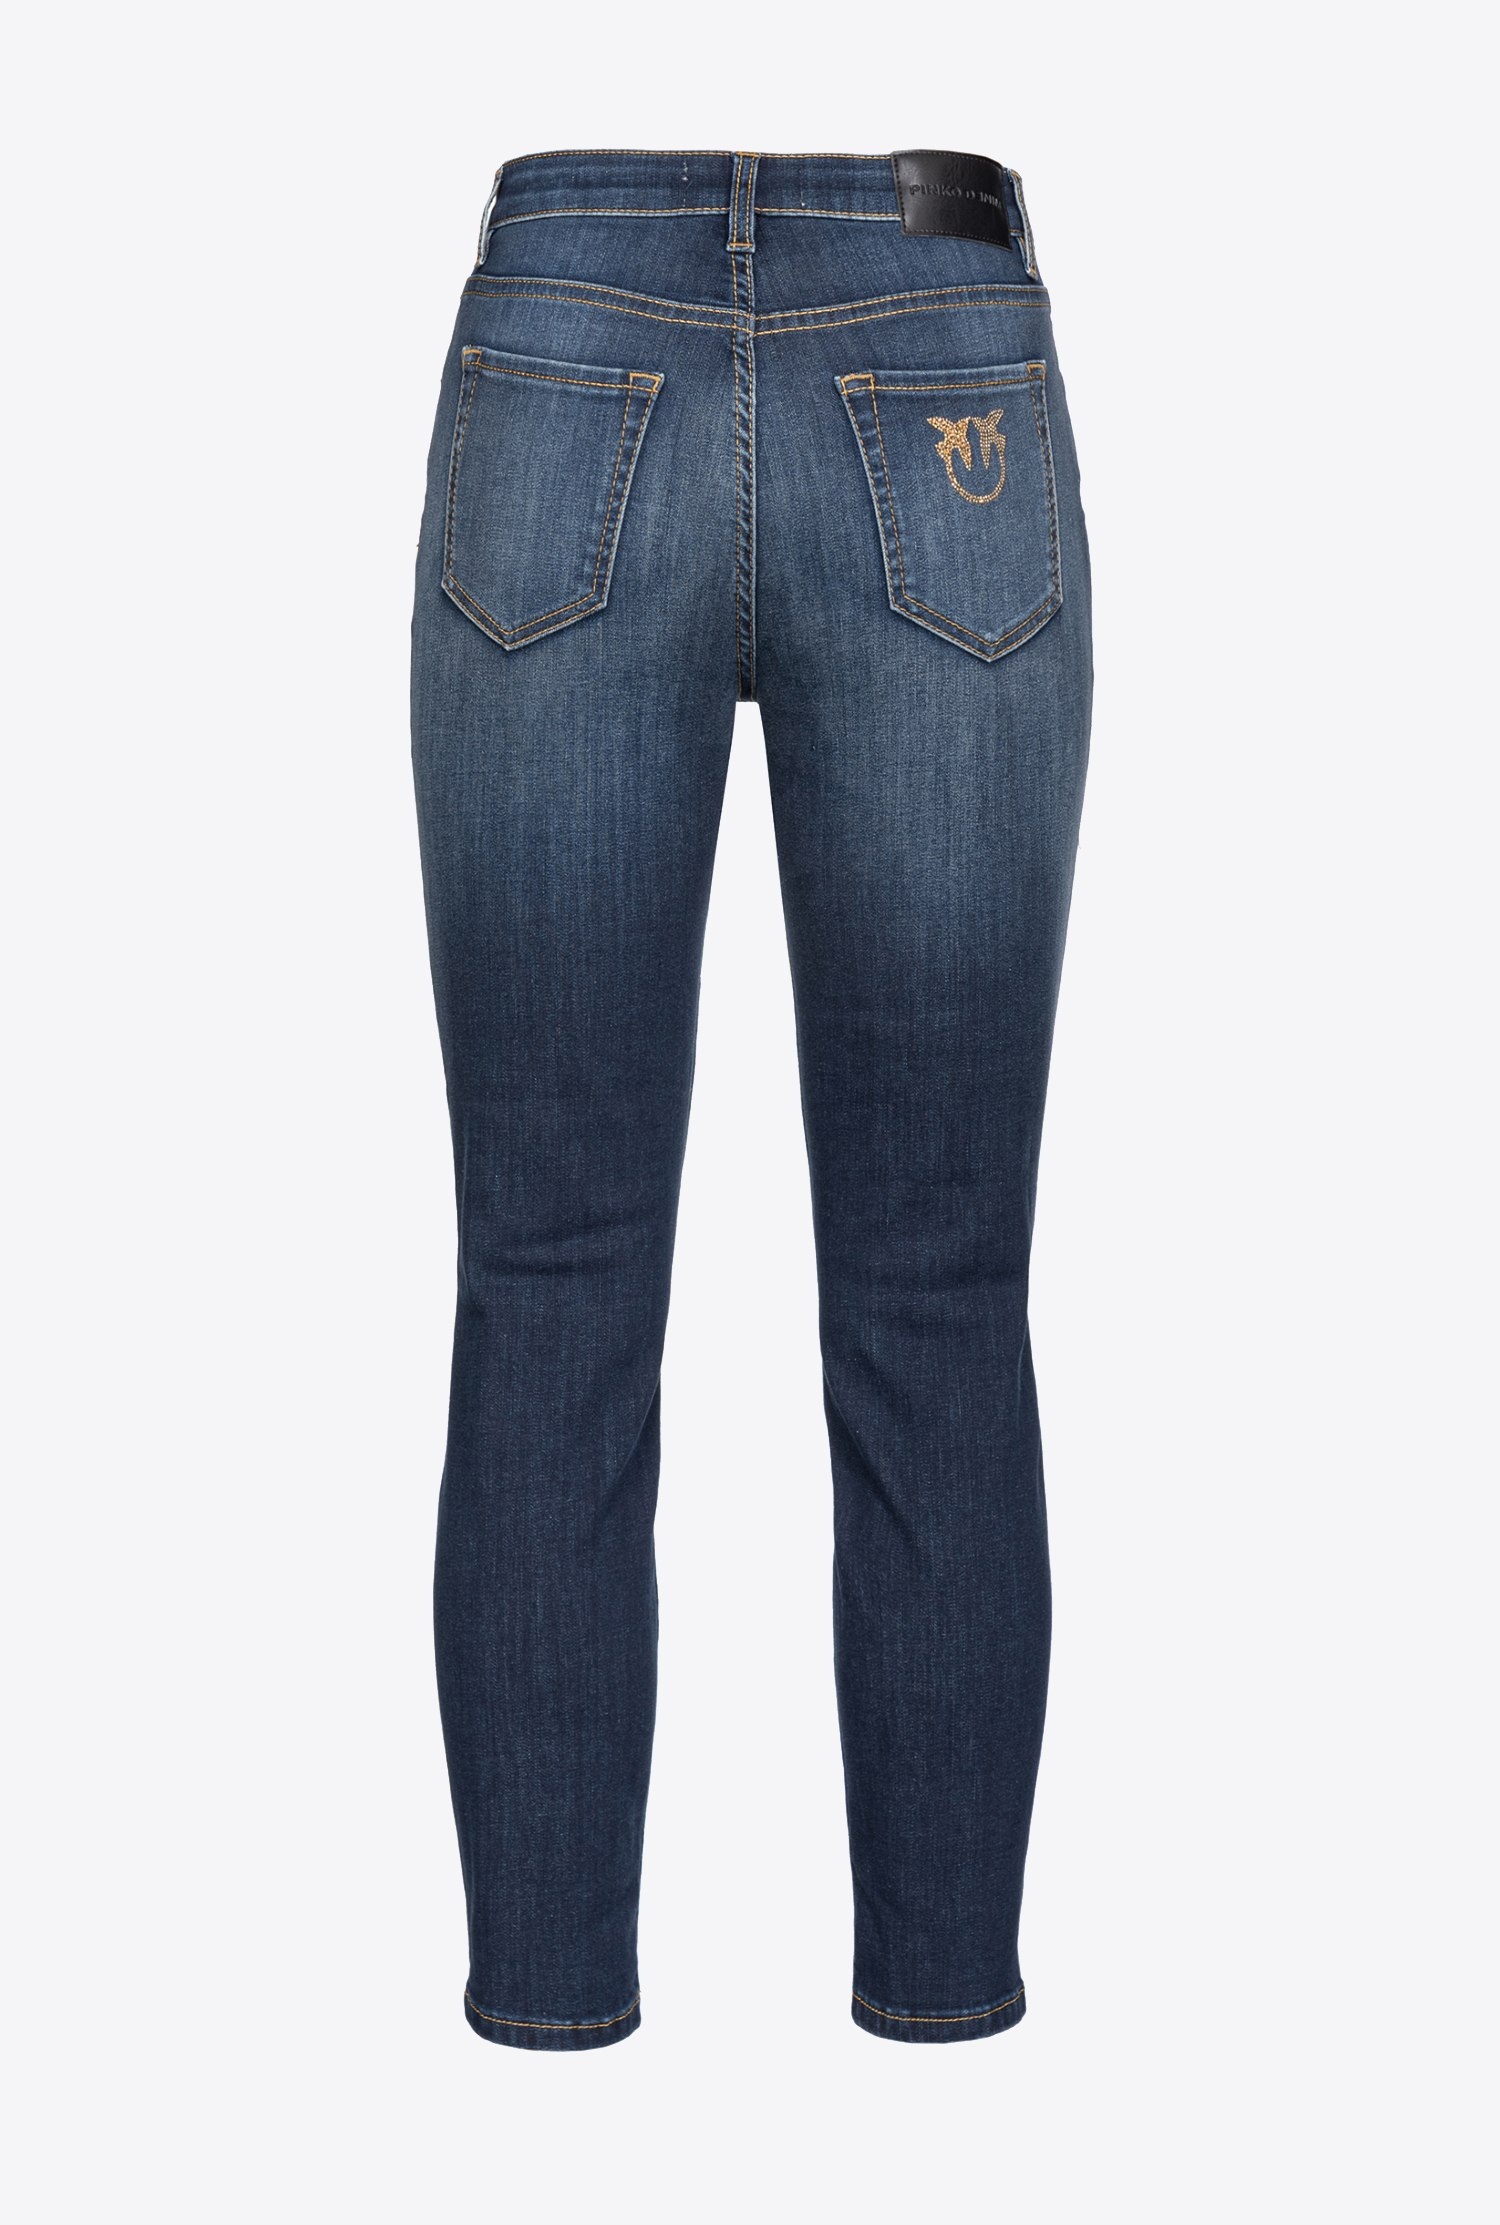 SKINNY STRETCH DENIM JEANS WITH EMBROIDERY ON THE BACK - 5